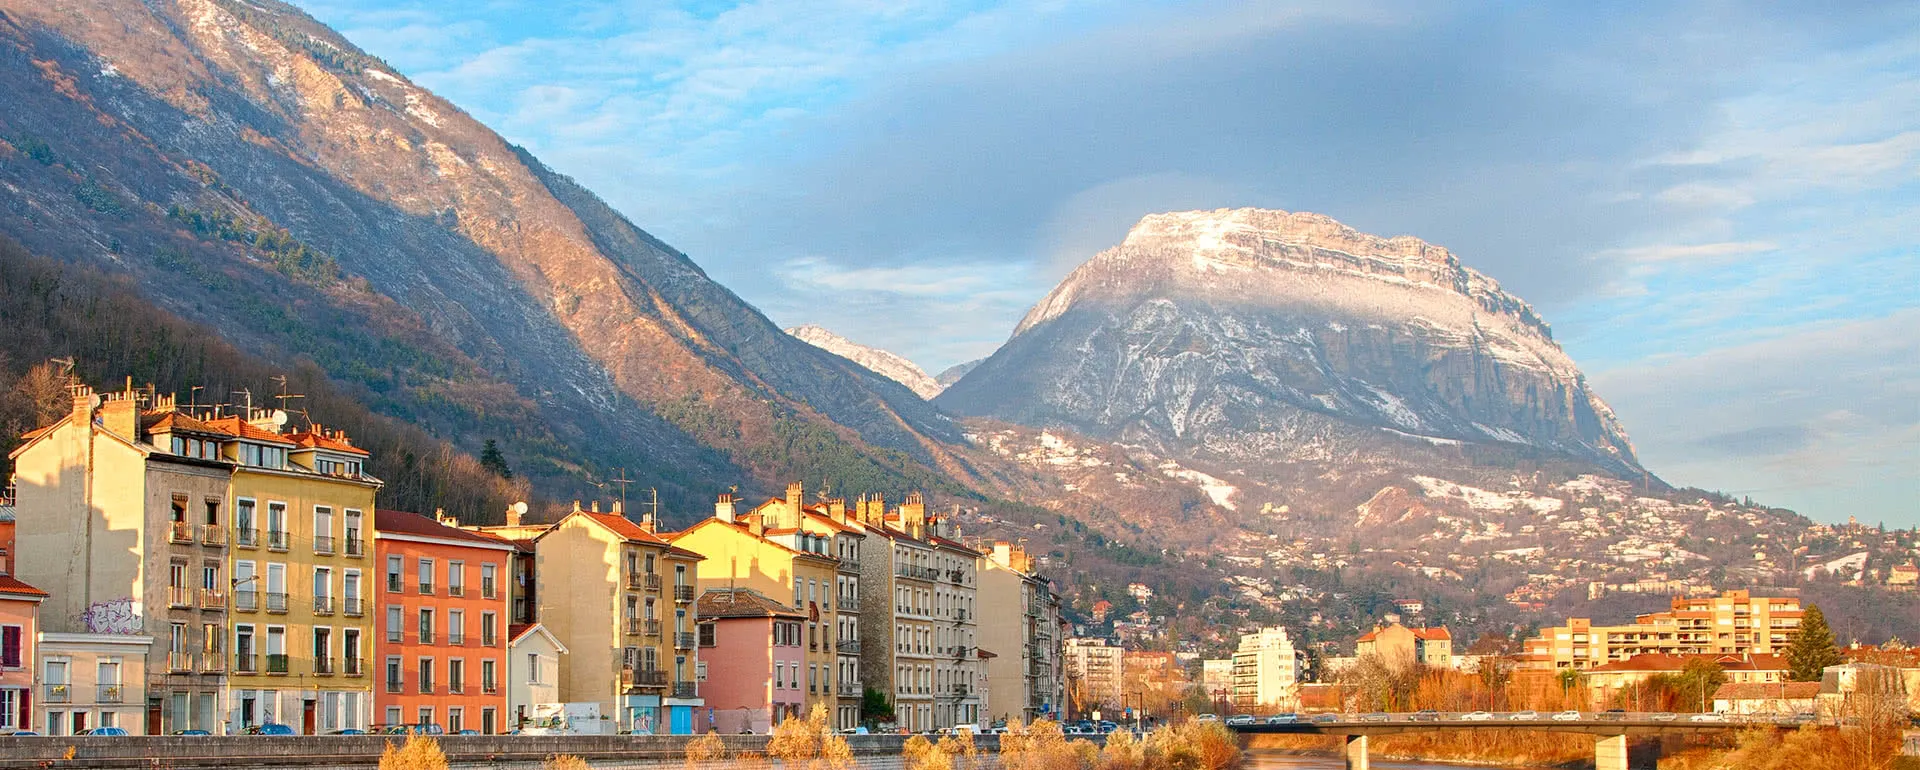 Grenoble - the destination for exhibition hotels